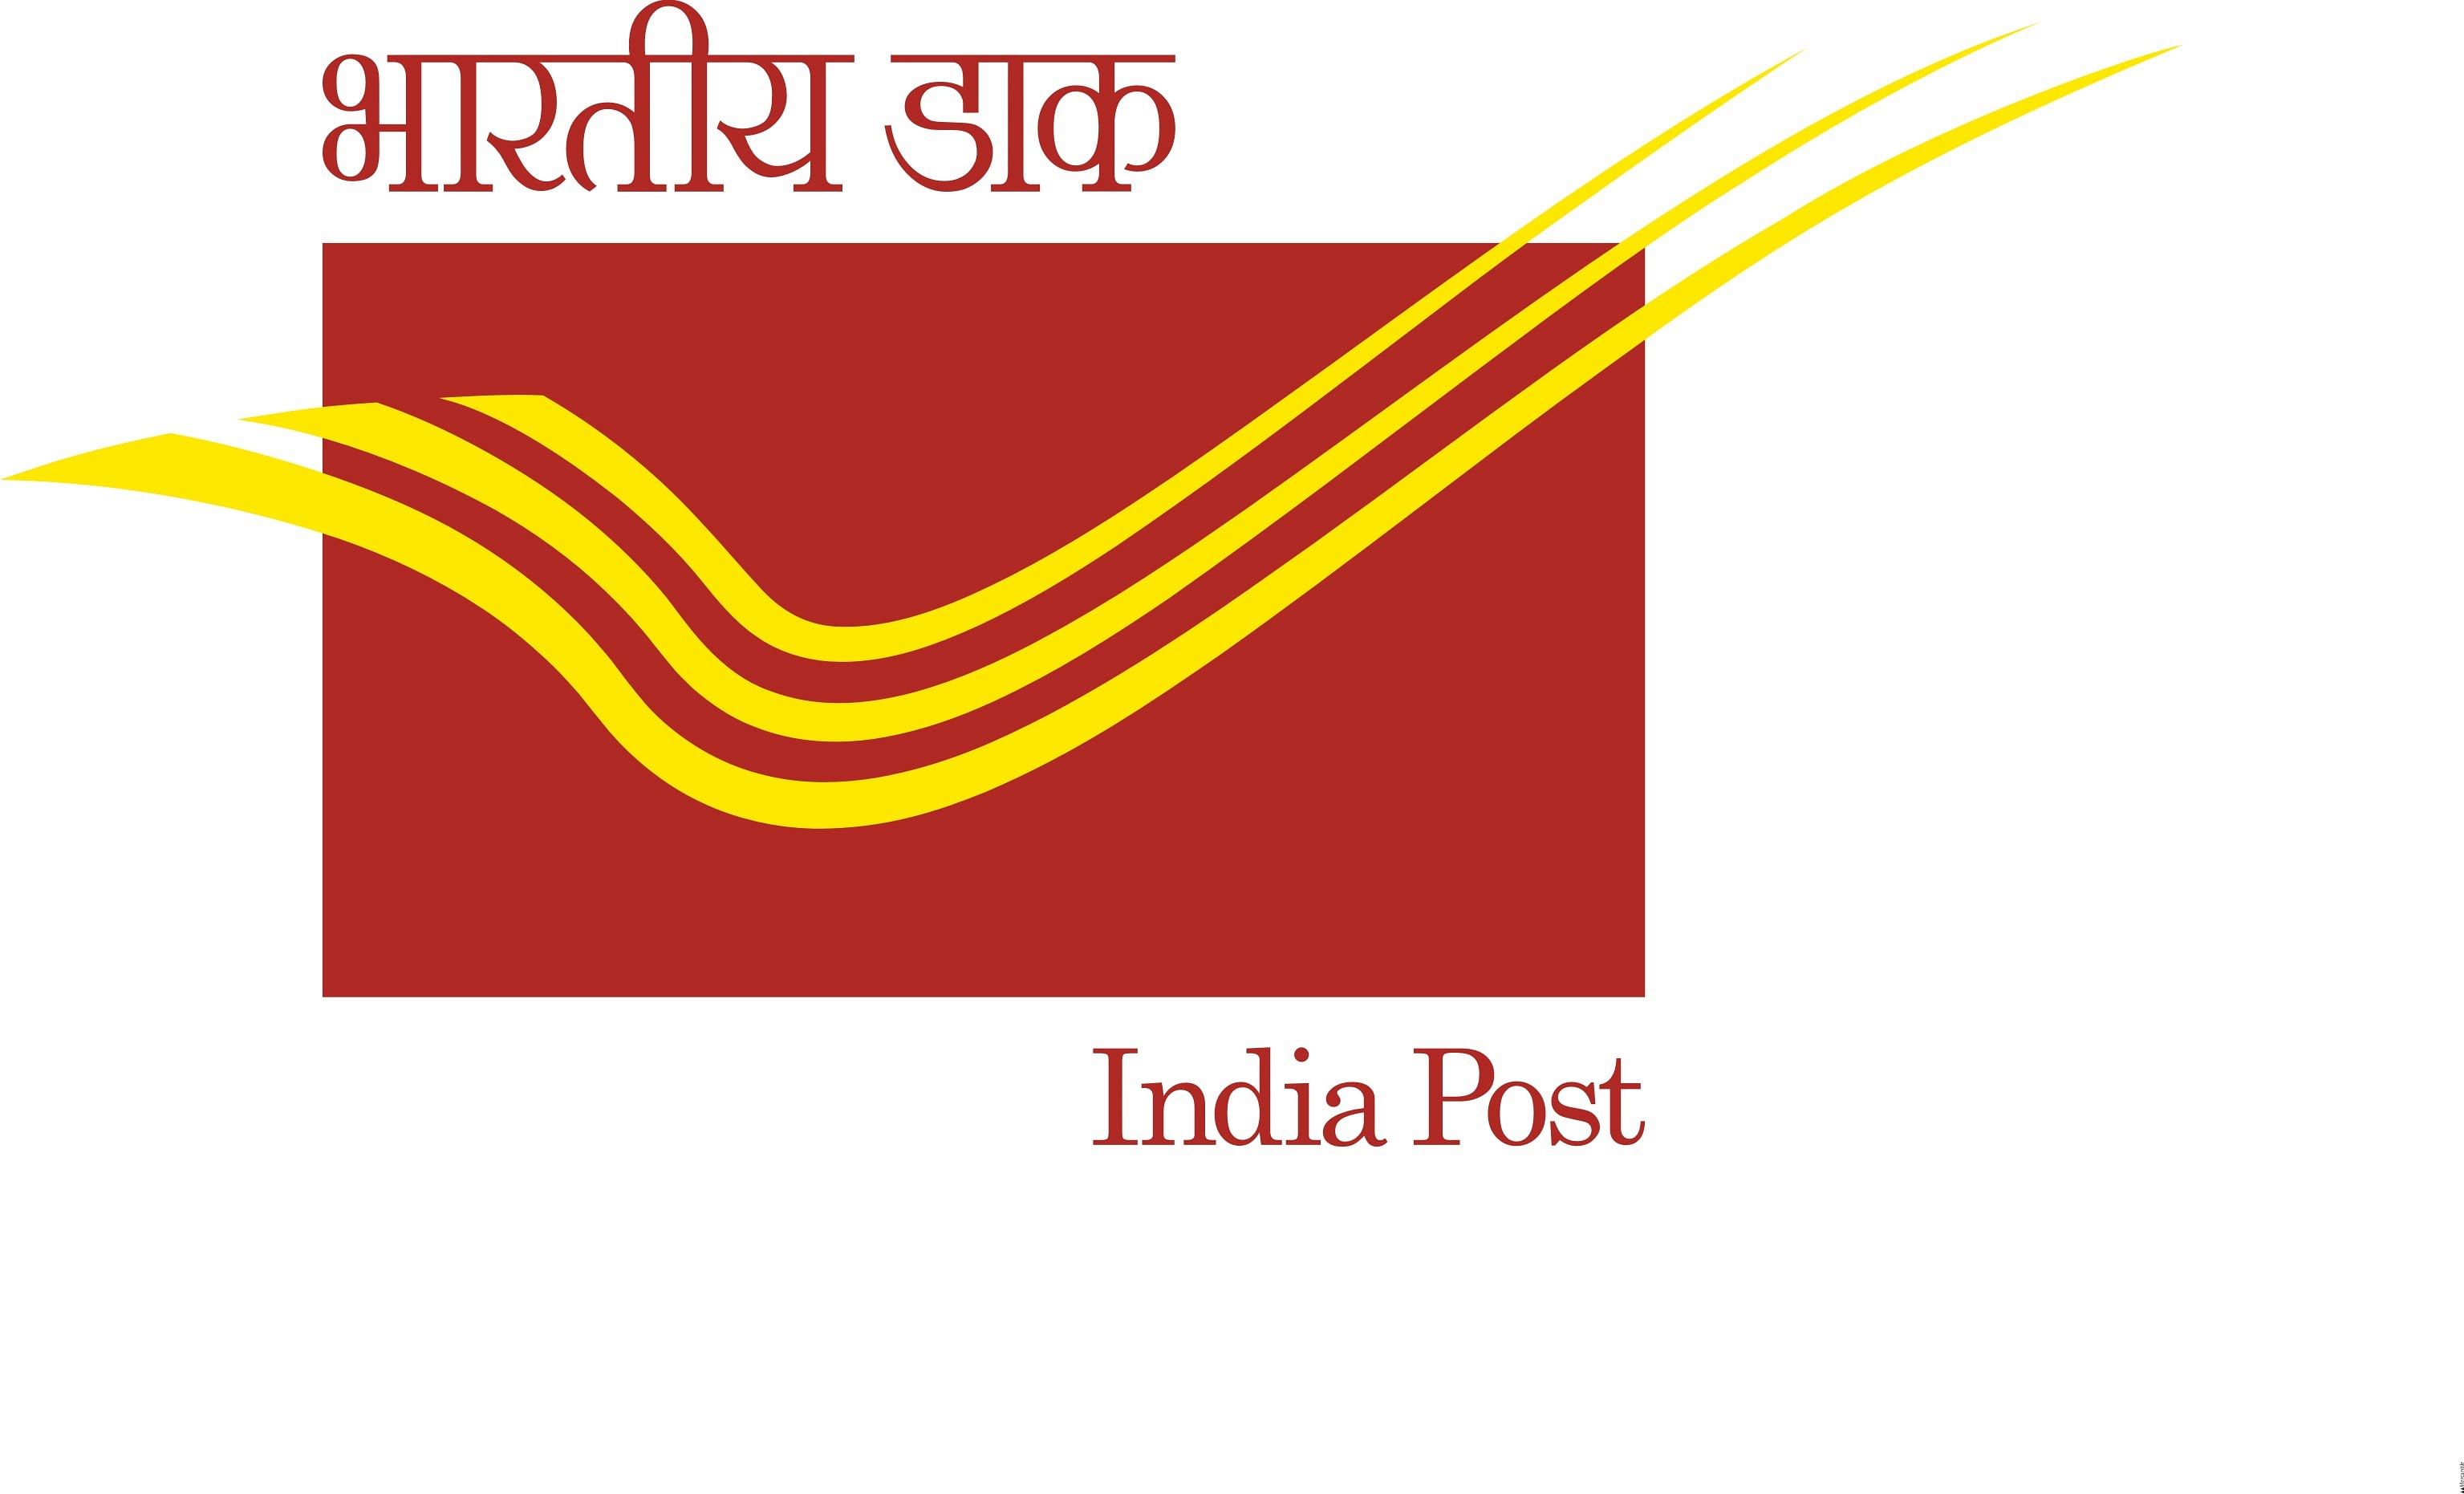 HP Postal Circle GDS Recruitment 2020: Vacancy for 634 Posts, 10th Pass Candidates can Apply